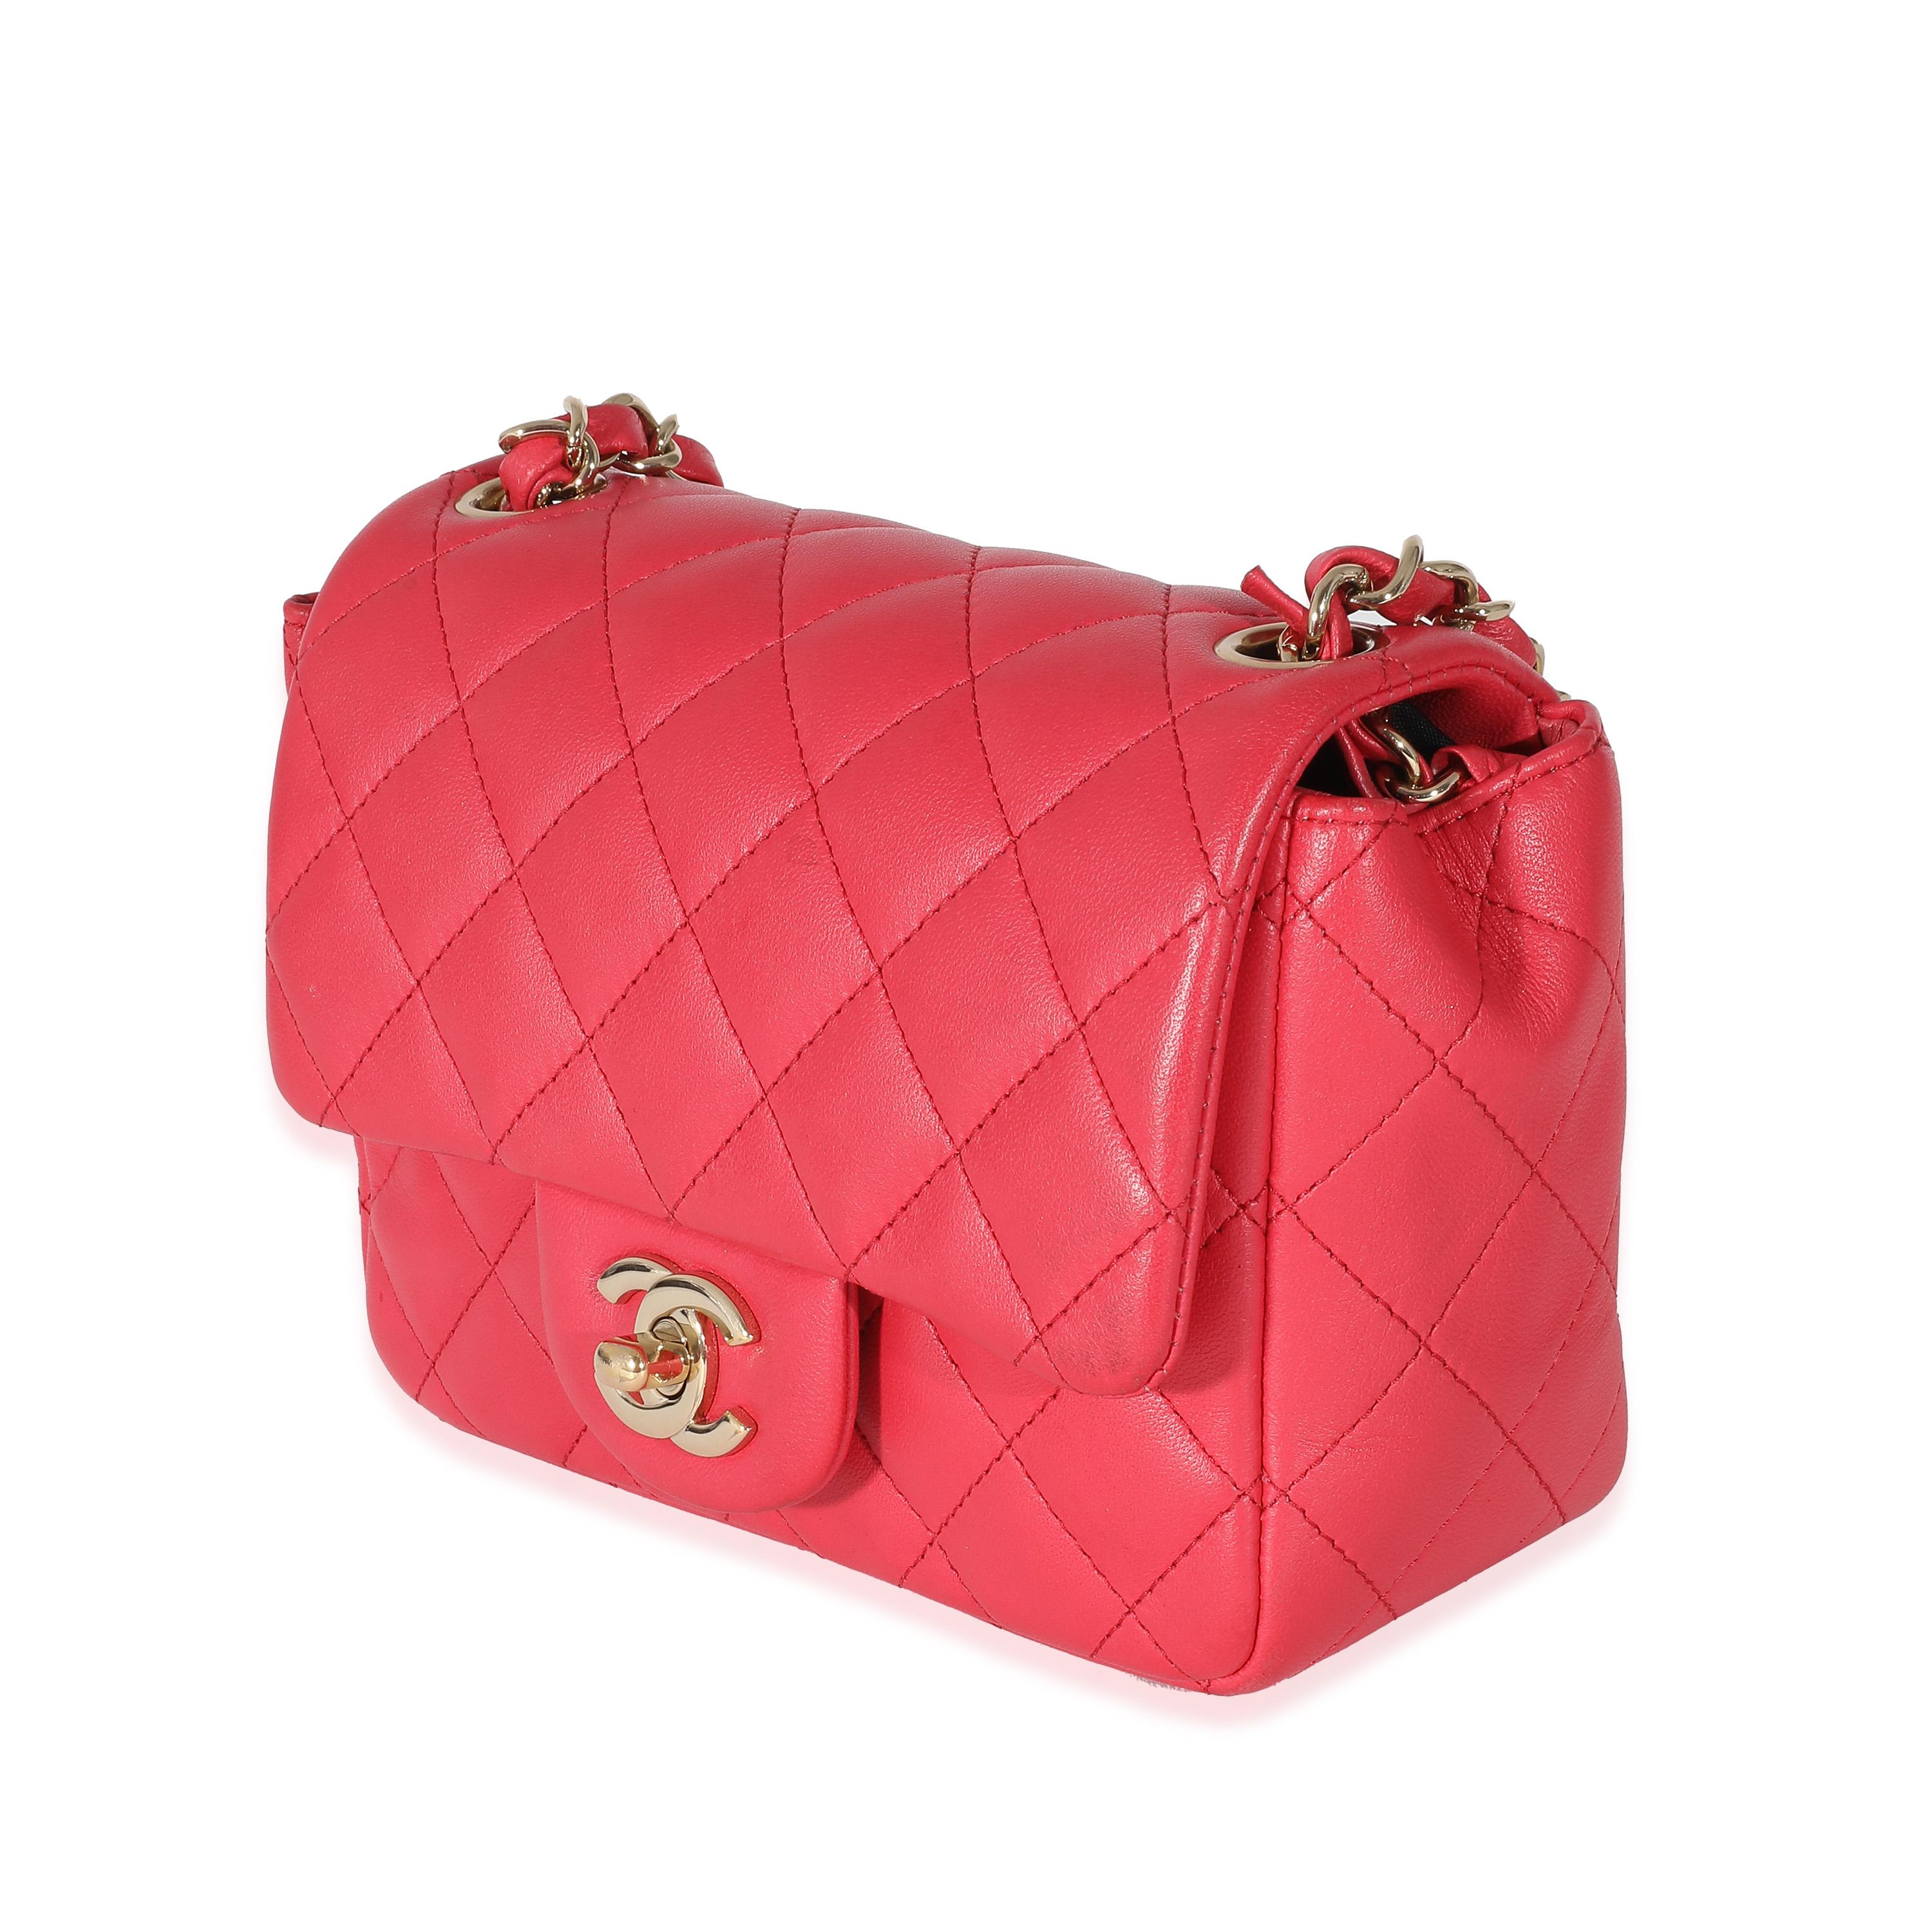 Chanel Dark Pink Quilted Lambskin Mini Square Flap Bag In Excellent Condition For Sale In New York, NY